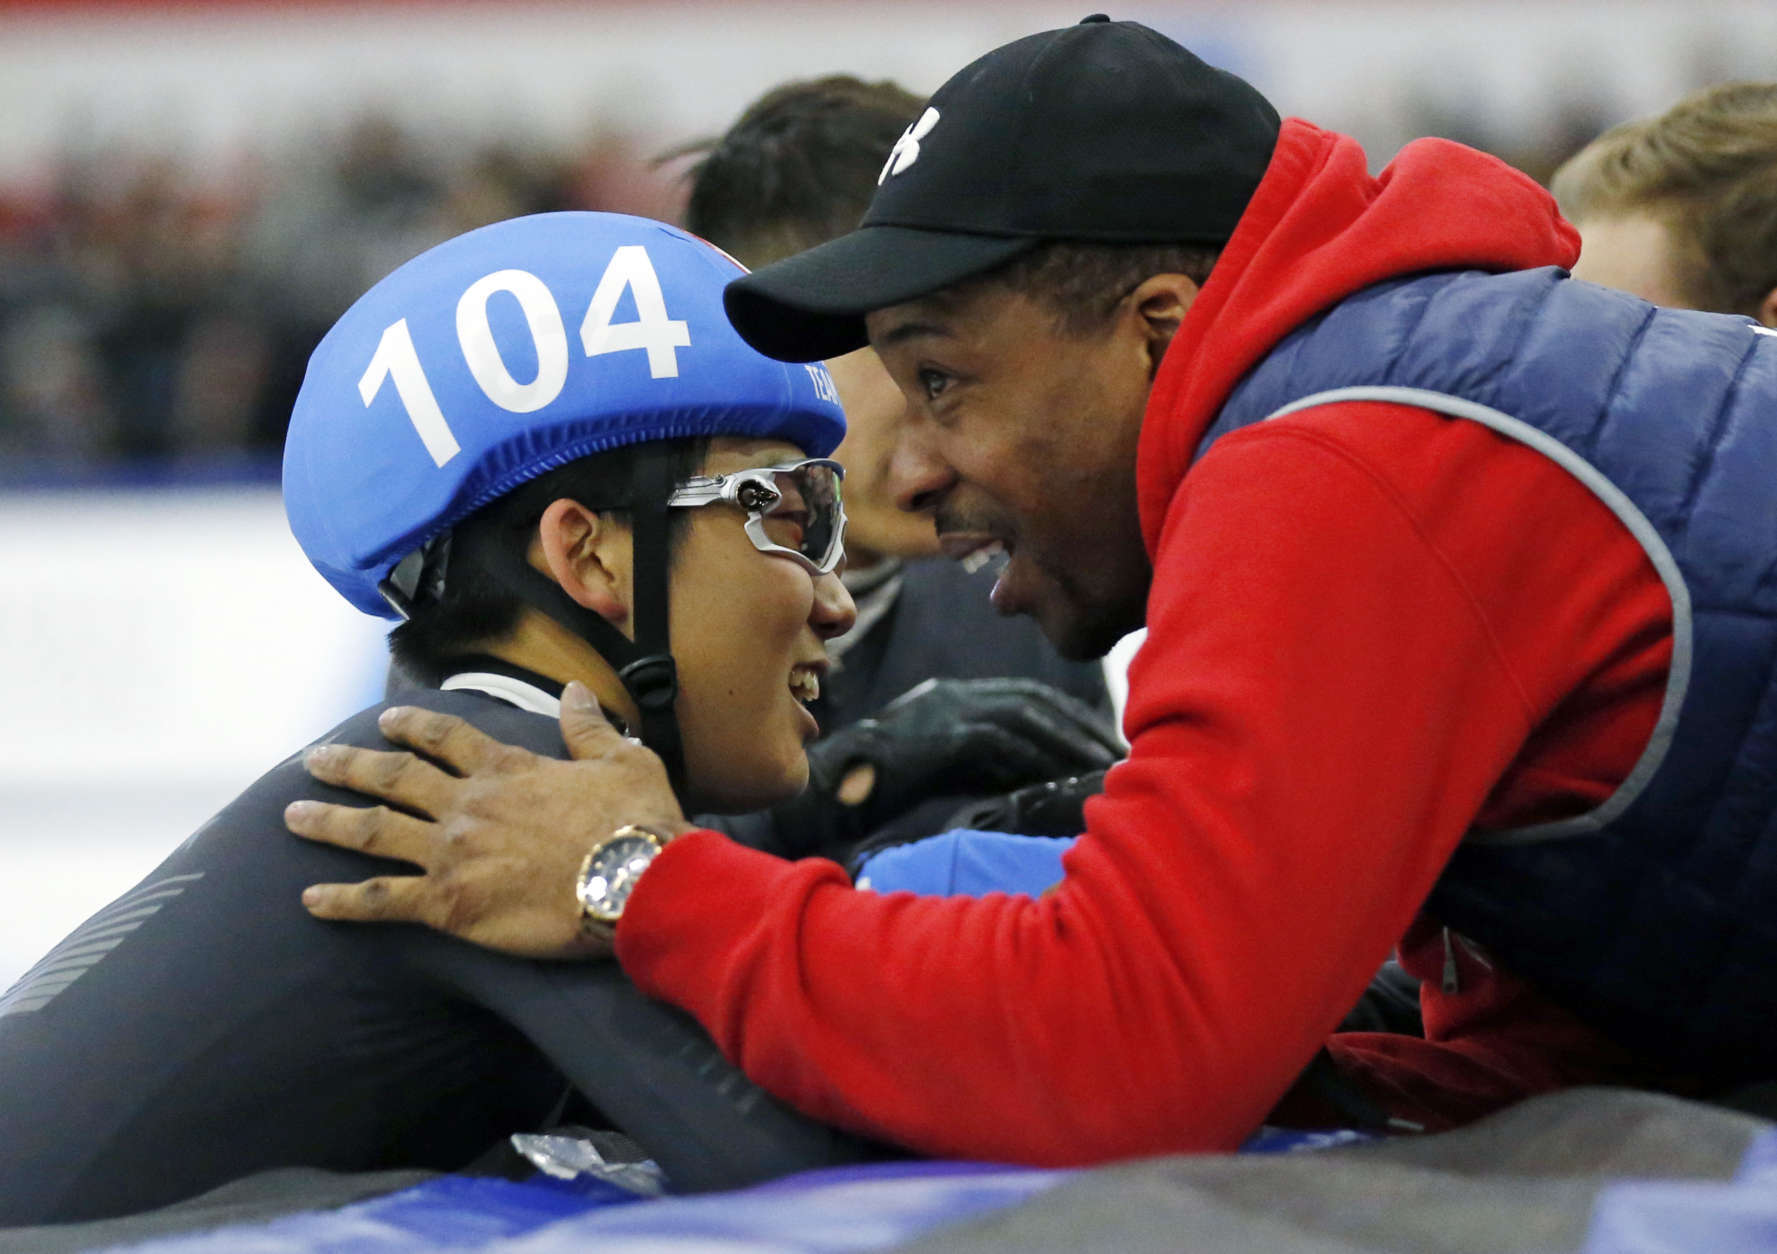 Thomas Insuk Hong (104) is congratulated by head coach Anthony Barthell after earning a nomination to the U.S.Olympic team after competing in the men's 1000-meter race during the U.S.Olympic short track speedskating trials Sunday, Dec. 17, 2017, in Kearns, Utah. (AP Photo/Rick Bowmer)